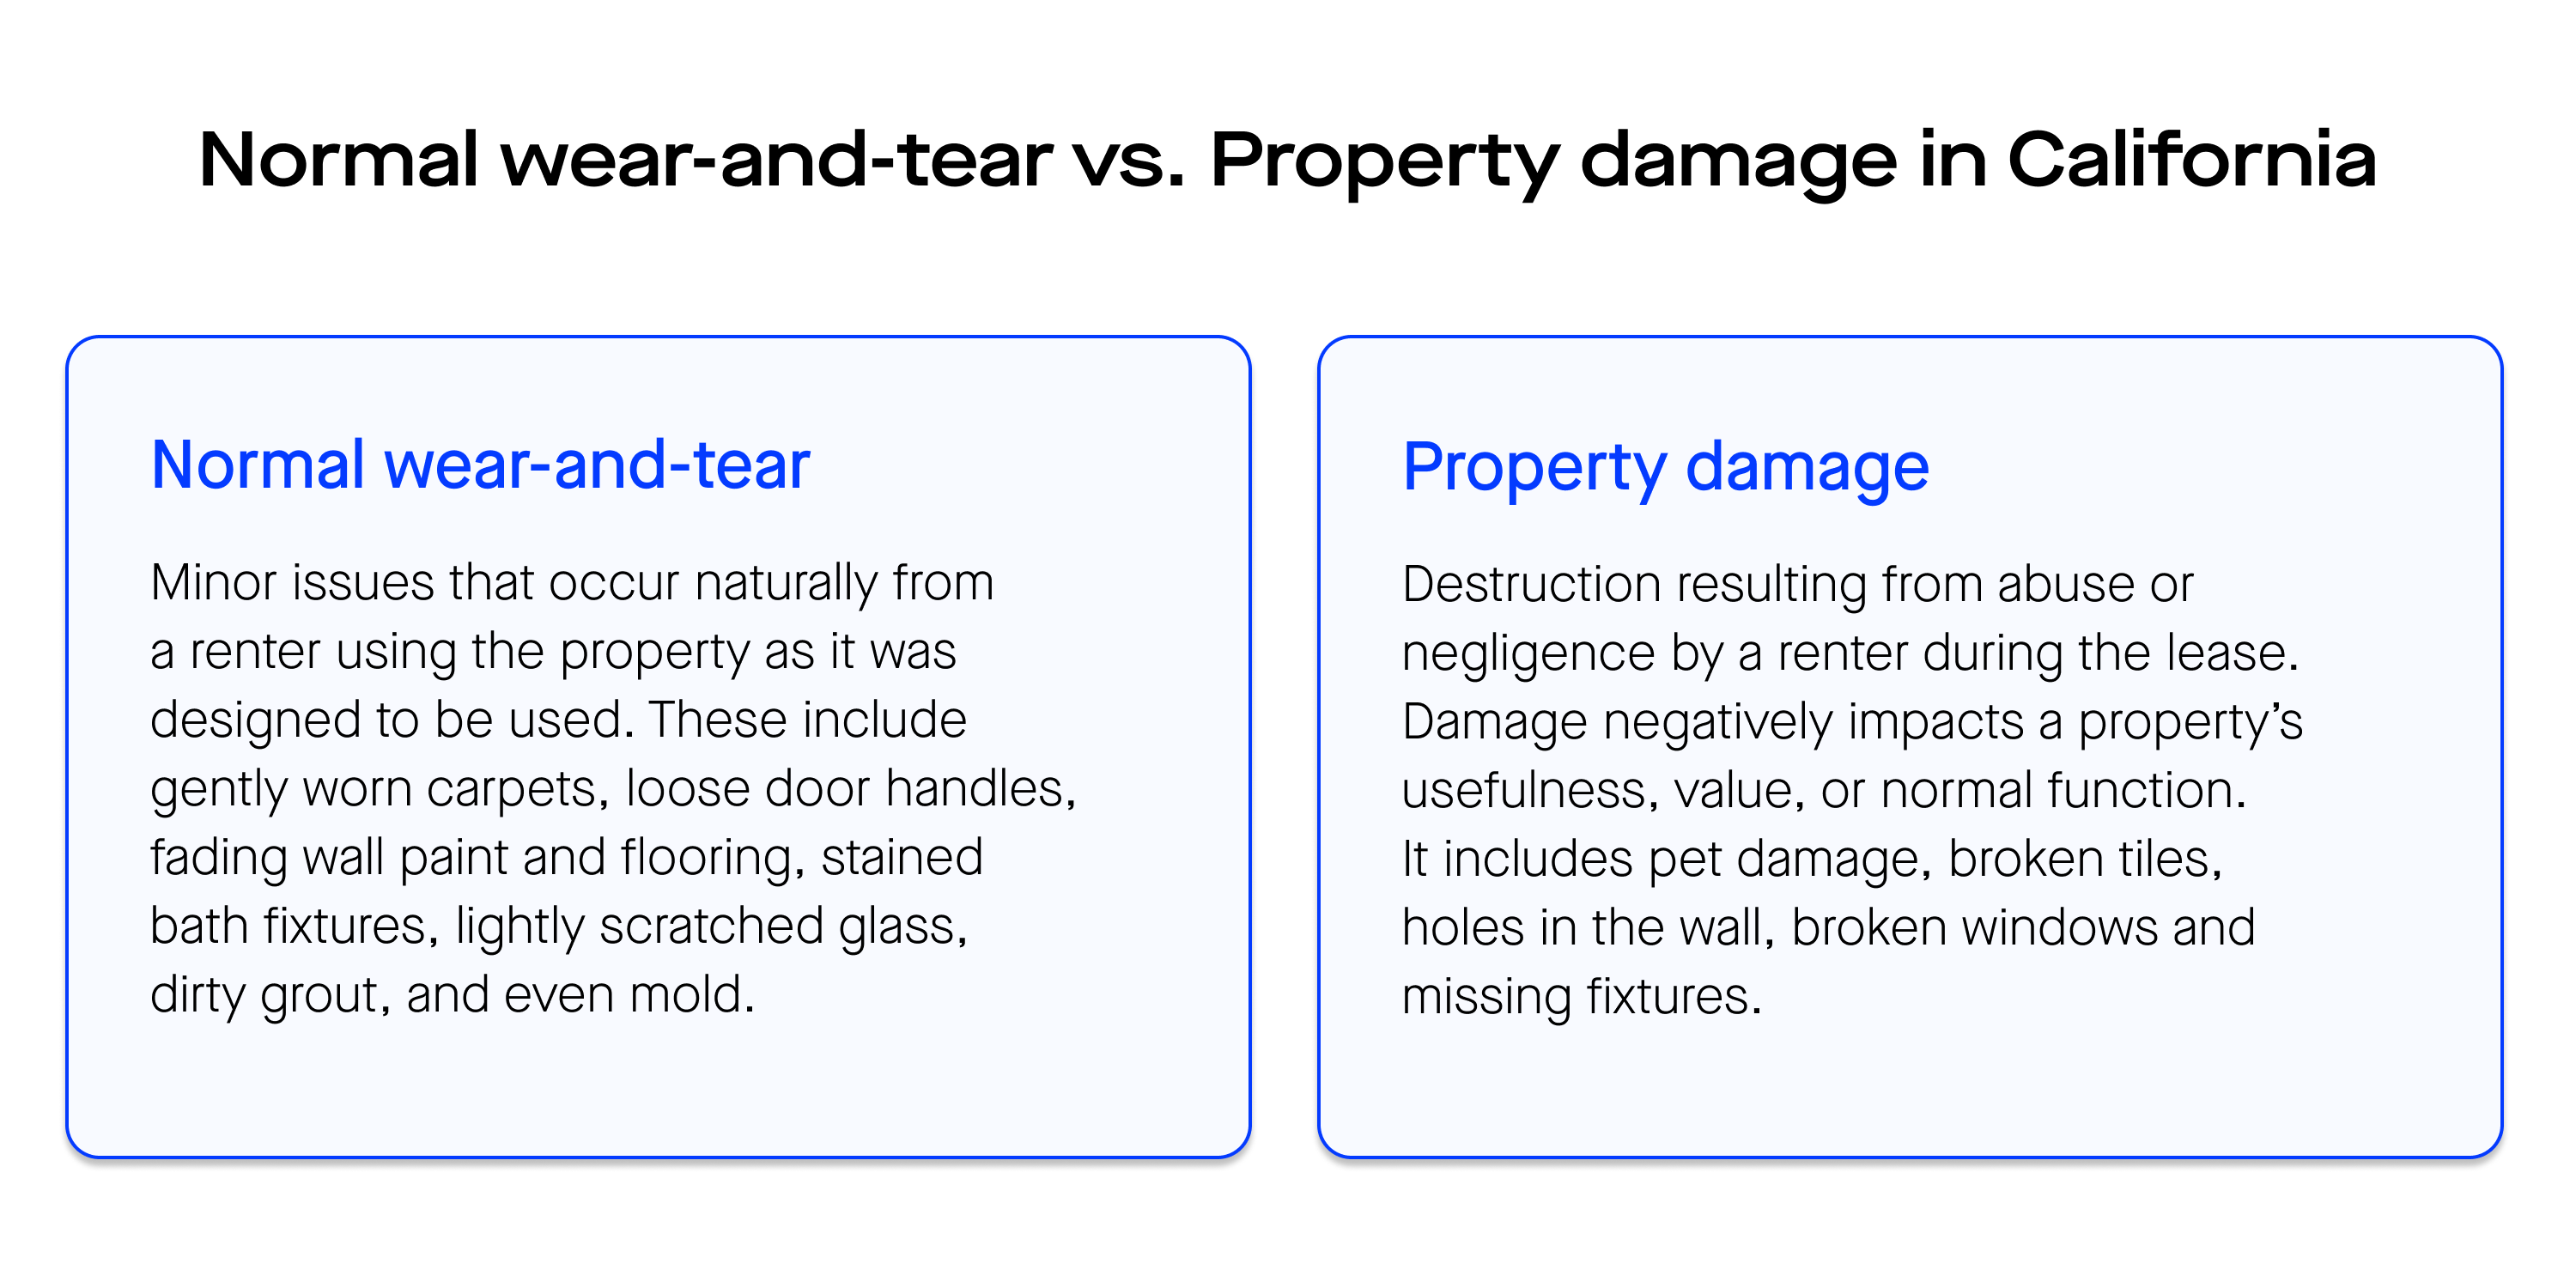 A graphic showing the differences between normal wear-and-tear and property damage